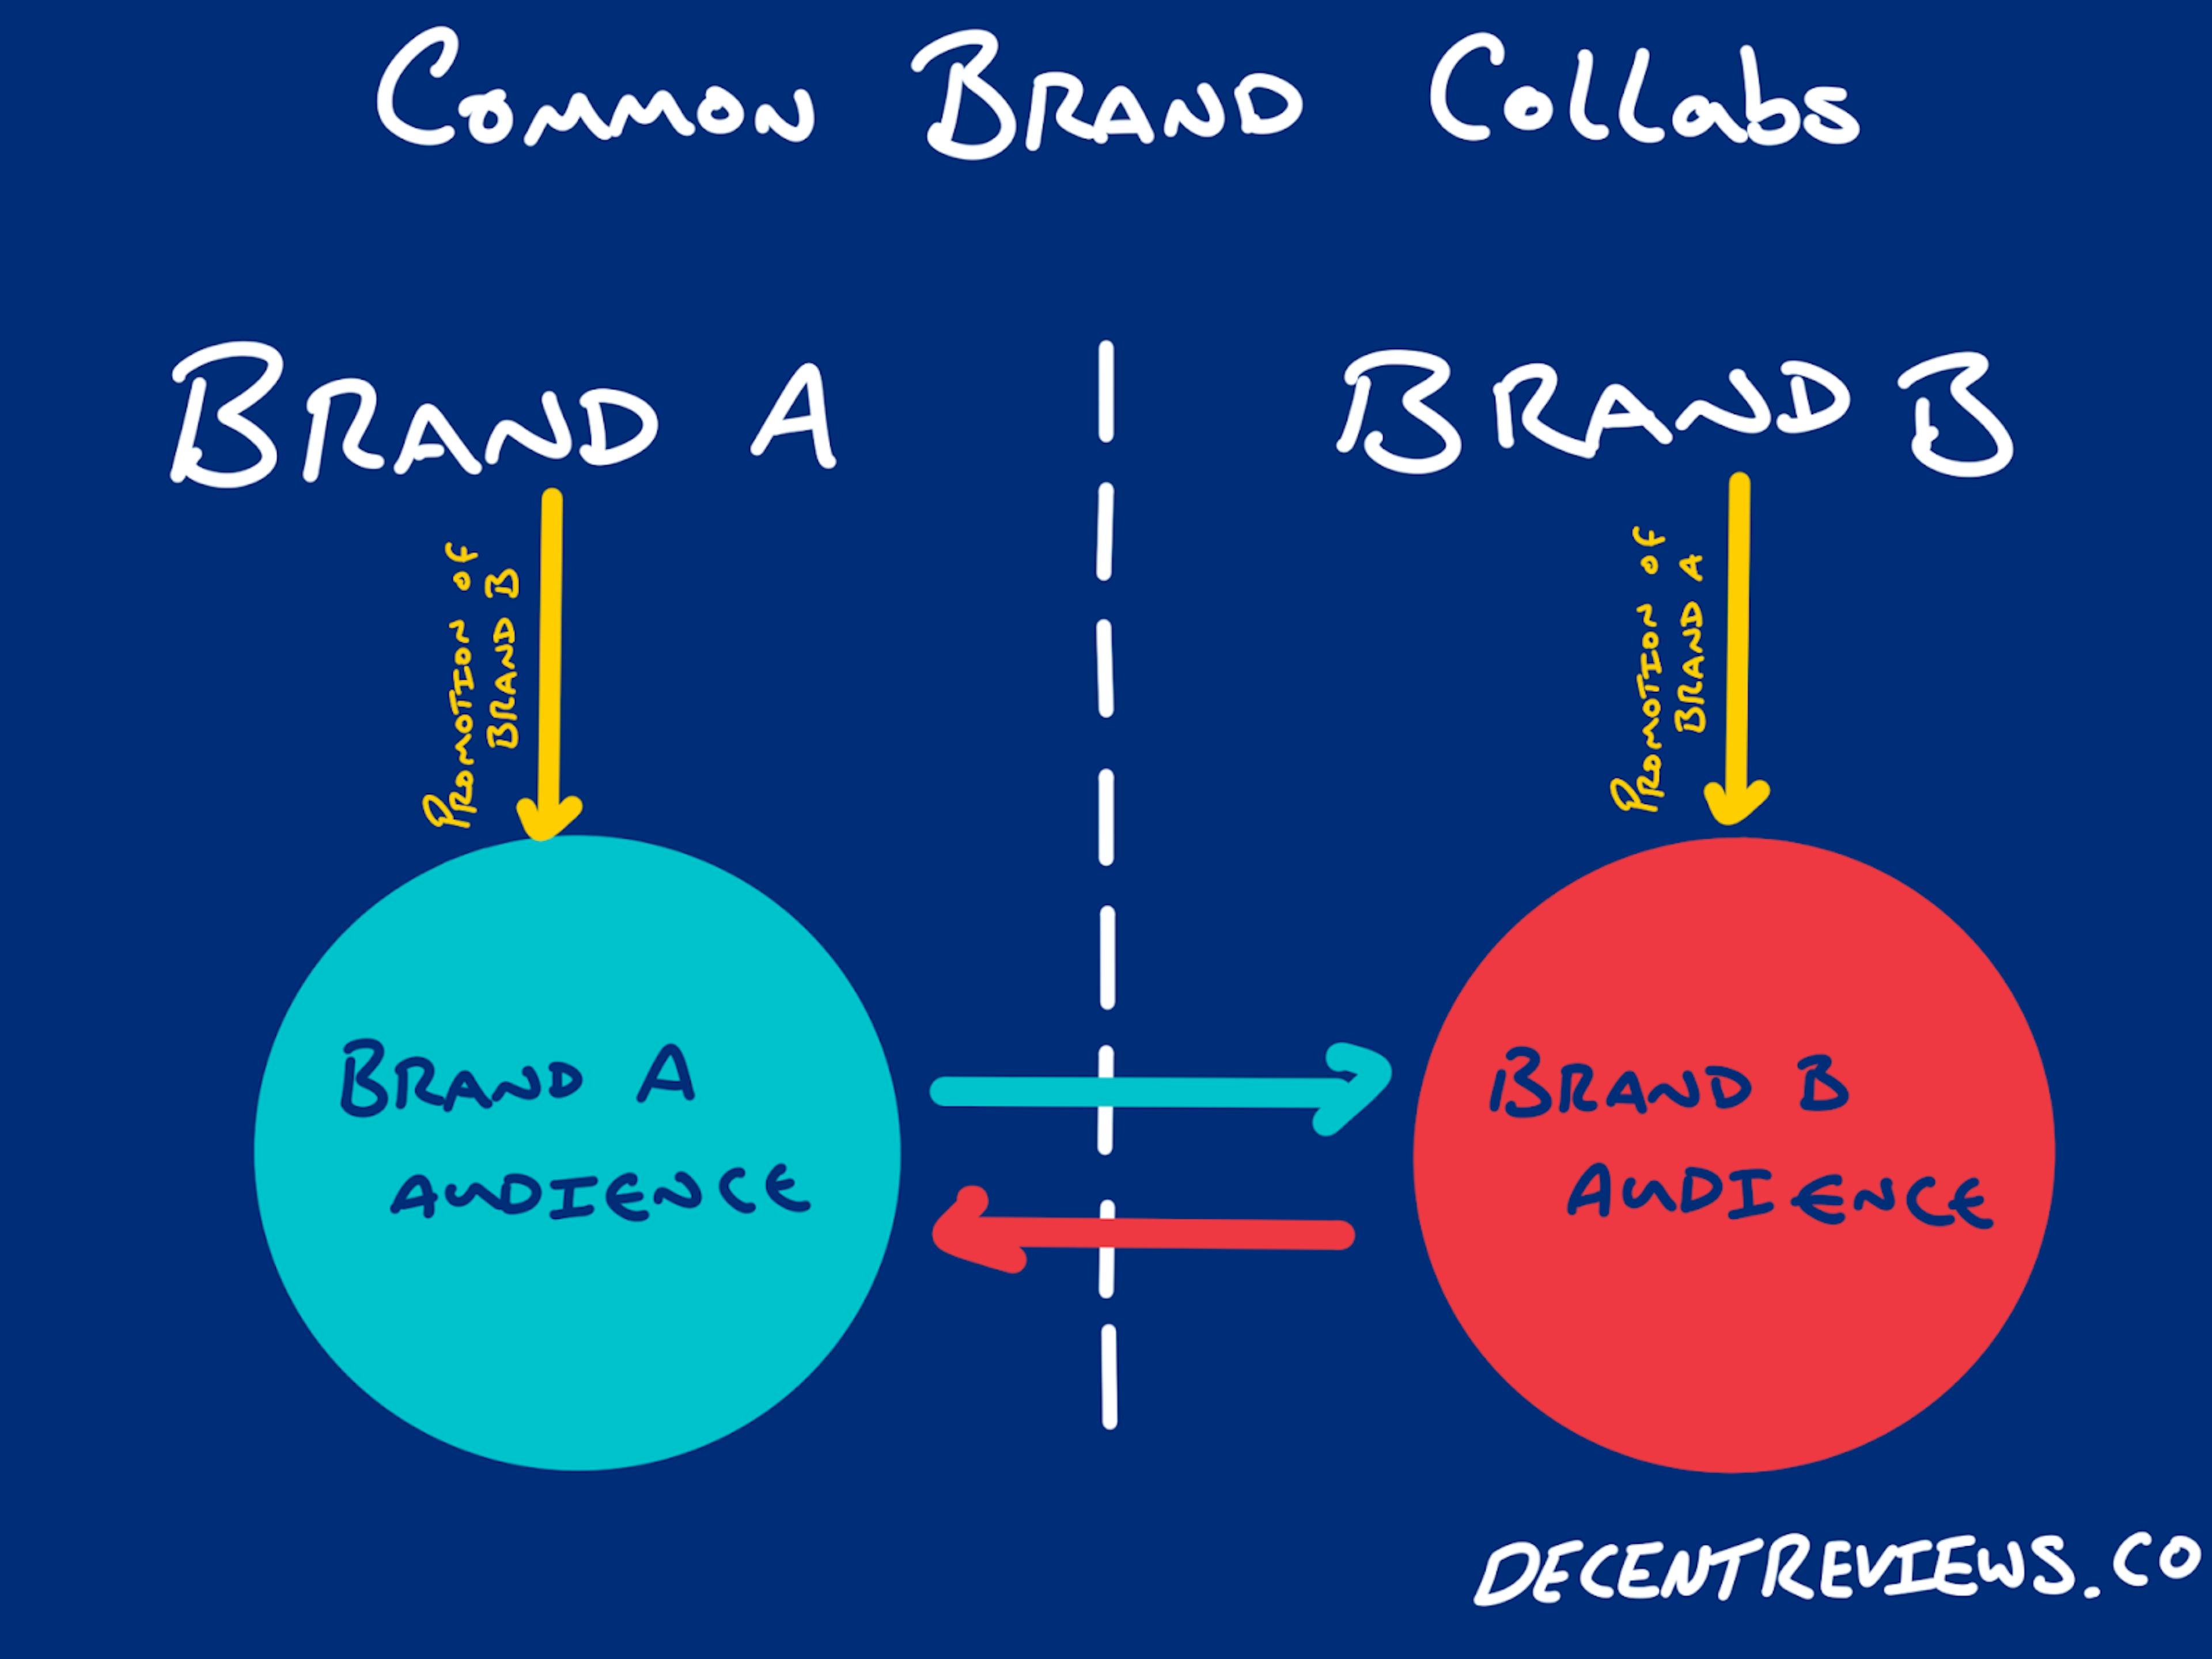 How common brand collaborations work